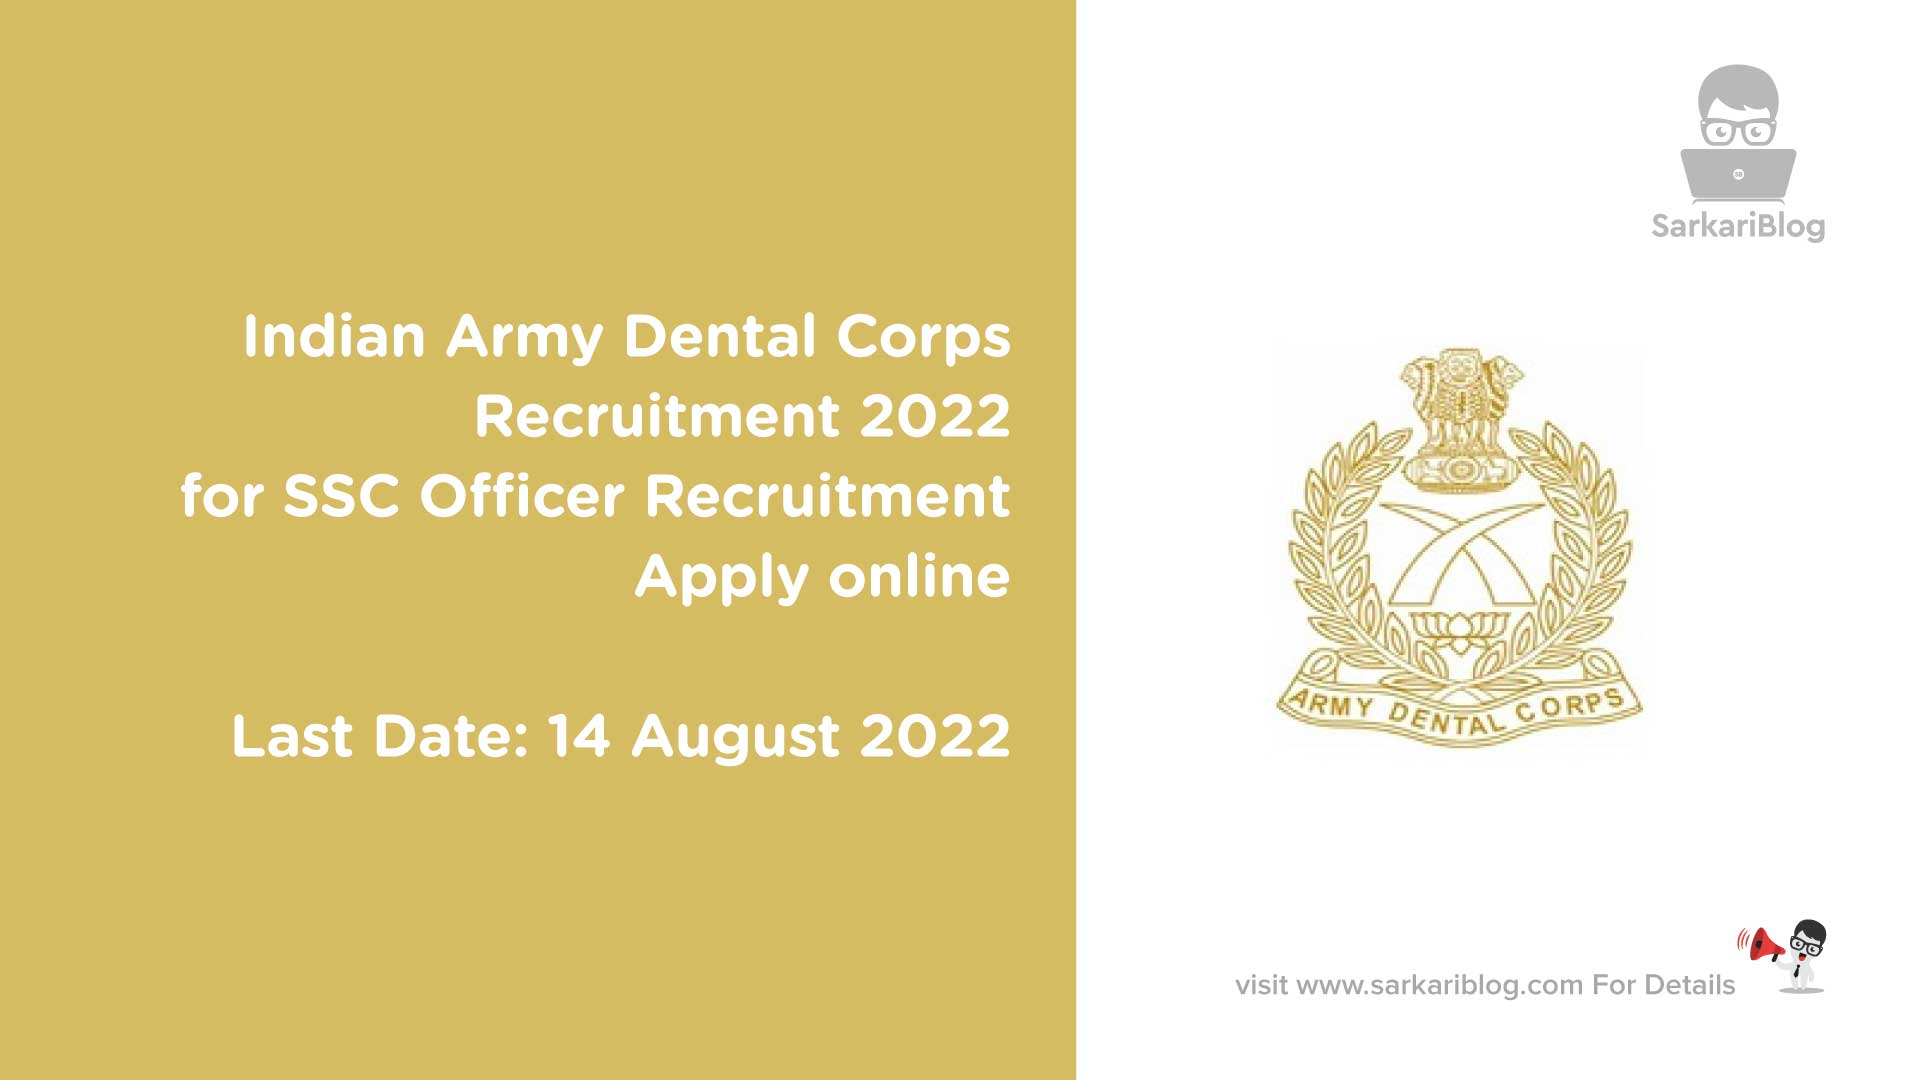 Indian Army Dental Corps 2022